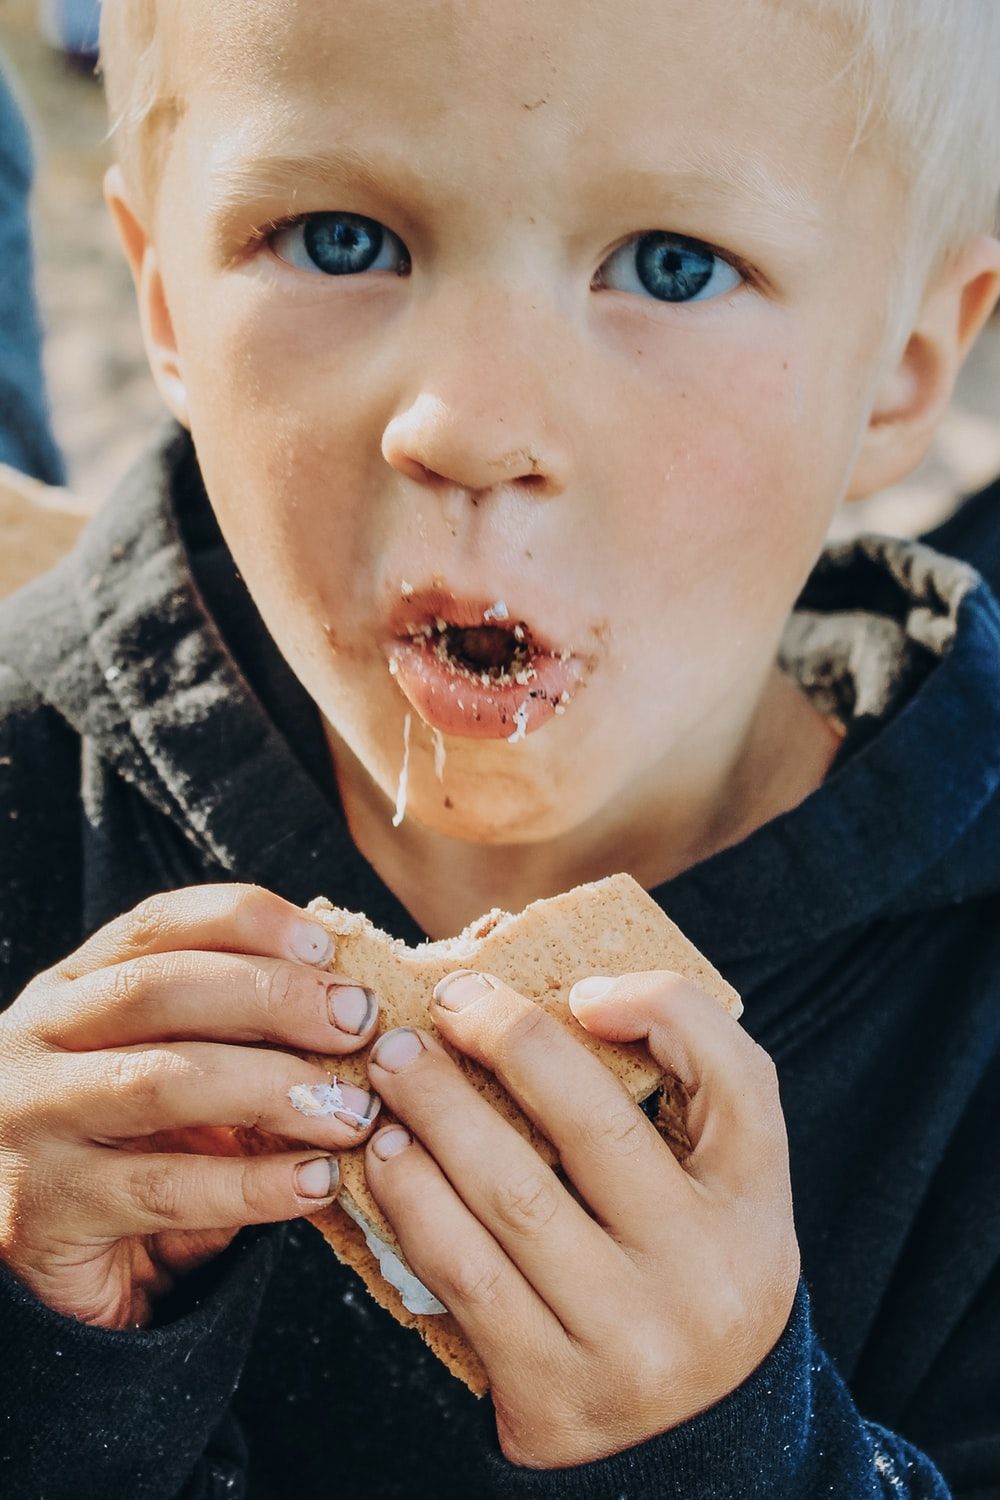 Children Eating Picture. Download Free Image